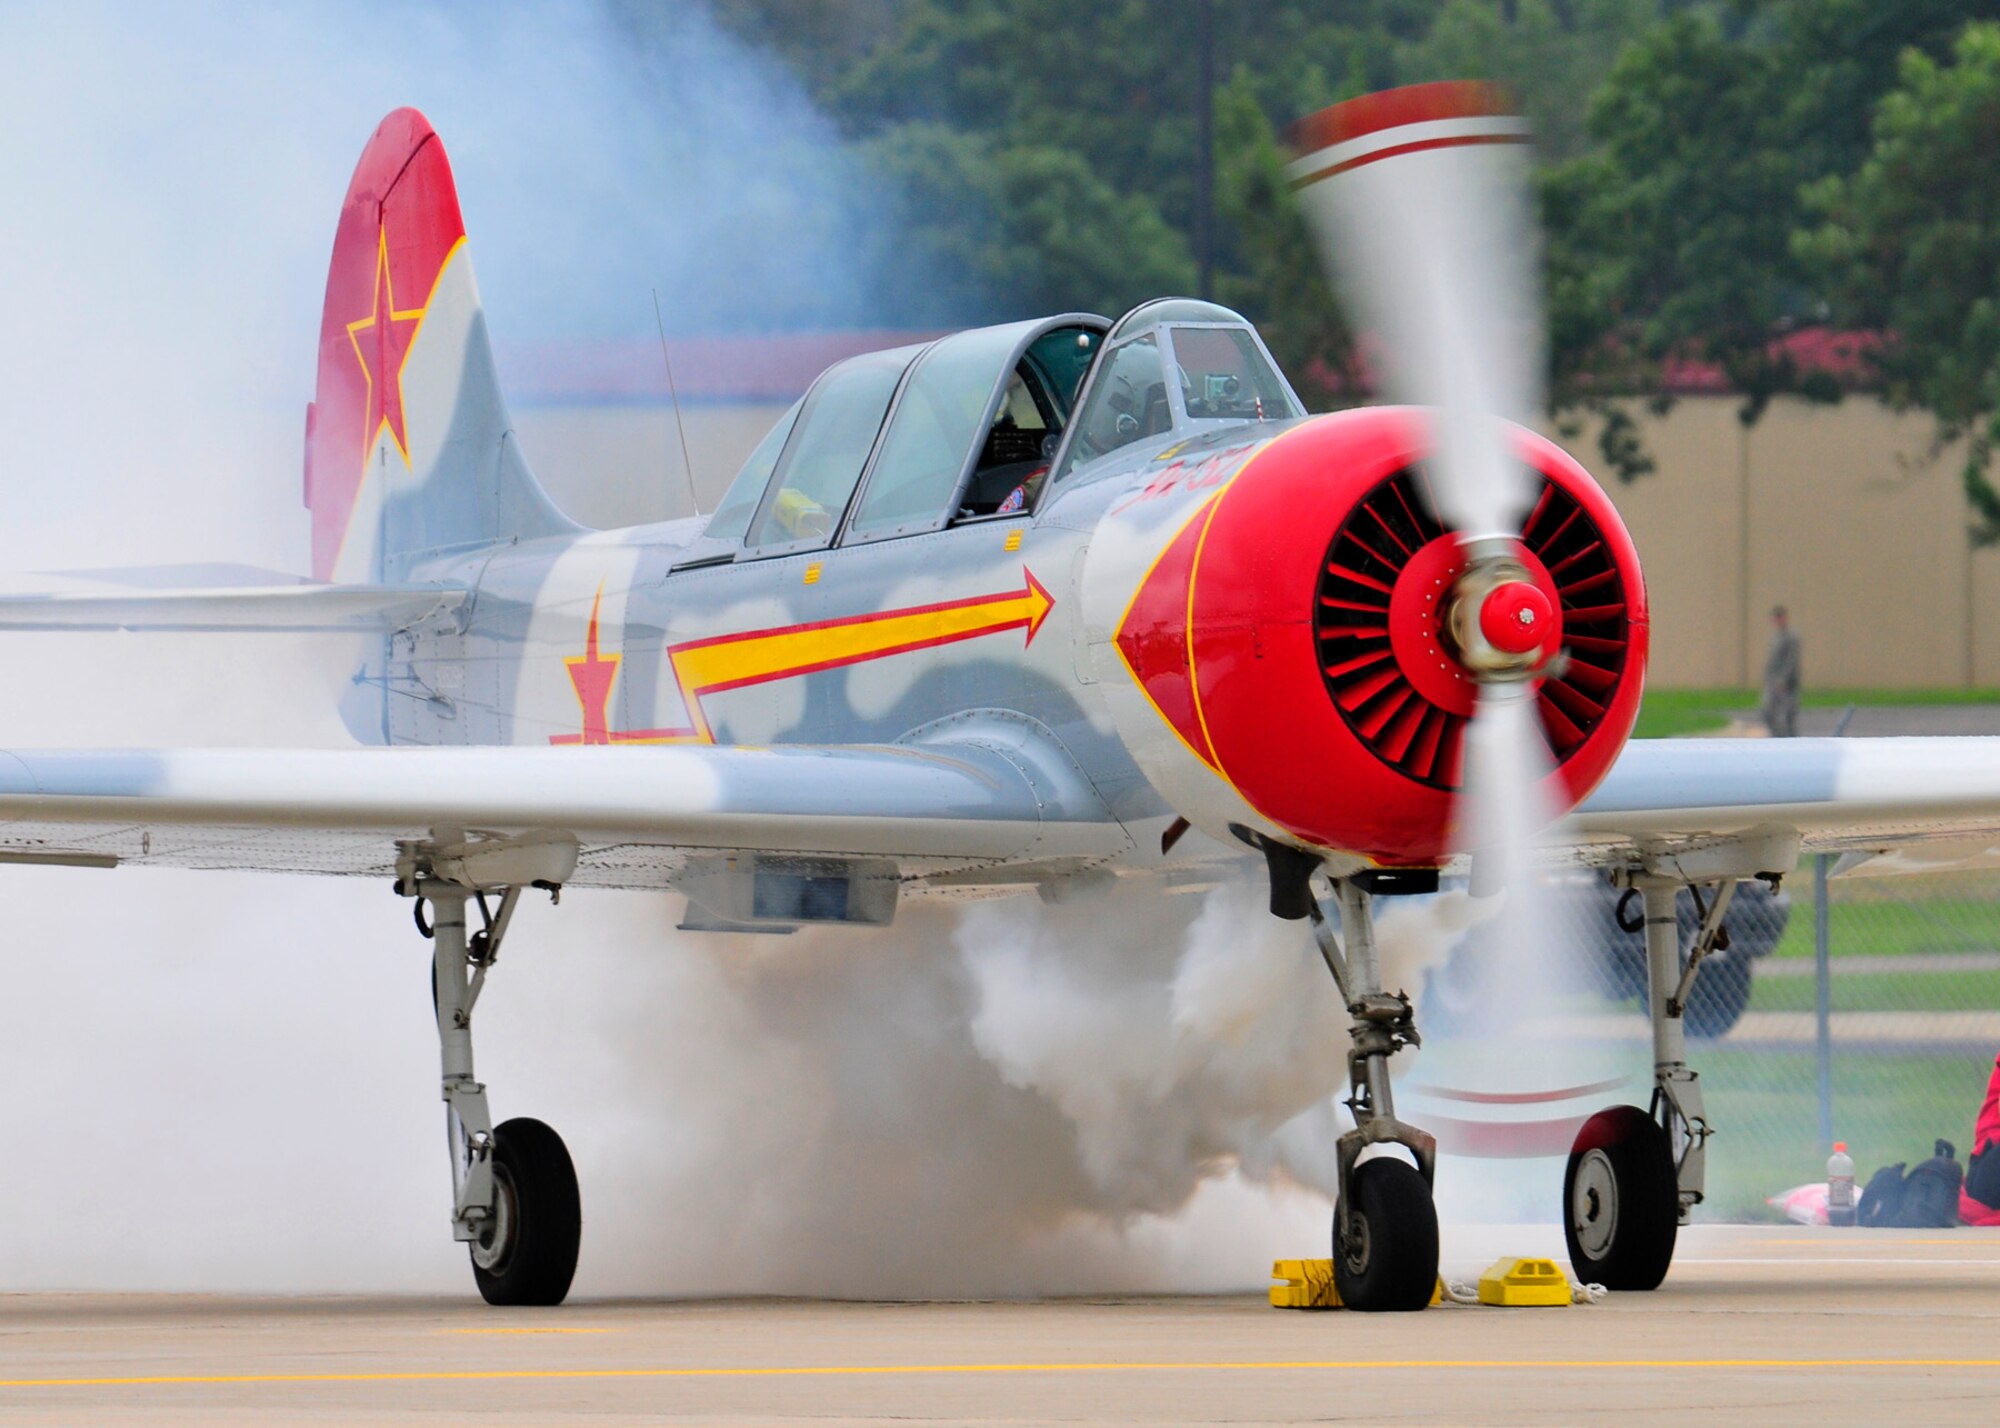 Mike Love starts up his Russian Yak-52 prior to his Airshow performance at Volk Field Open House, 21 Aug 2010.  (U.S. Air Force photo courtesy Joe Oliva) (RELEASED)